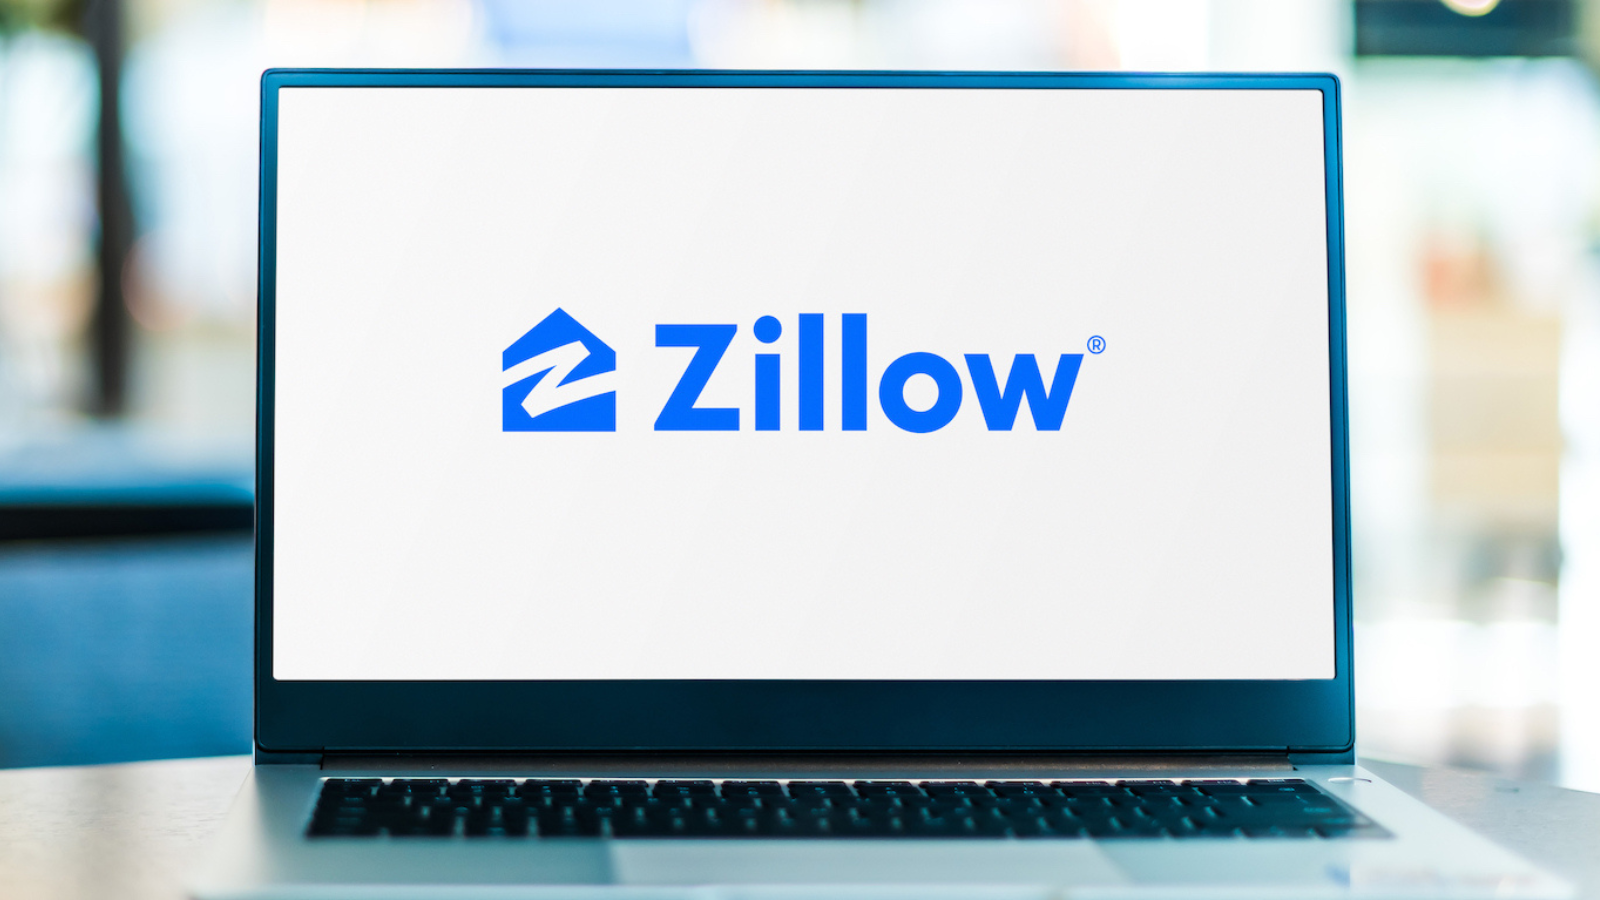 The Zillow logo on an open laptop.